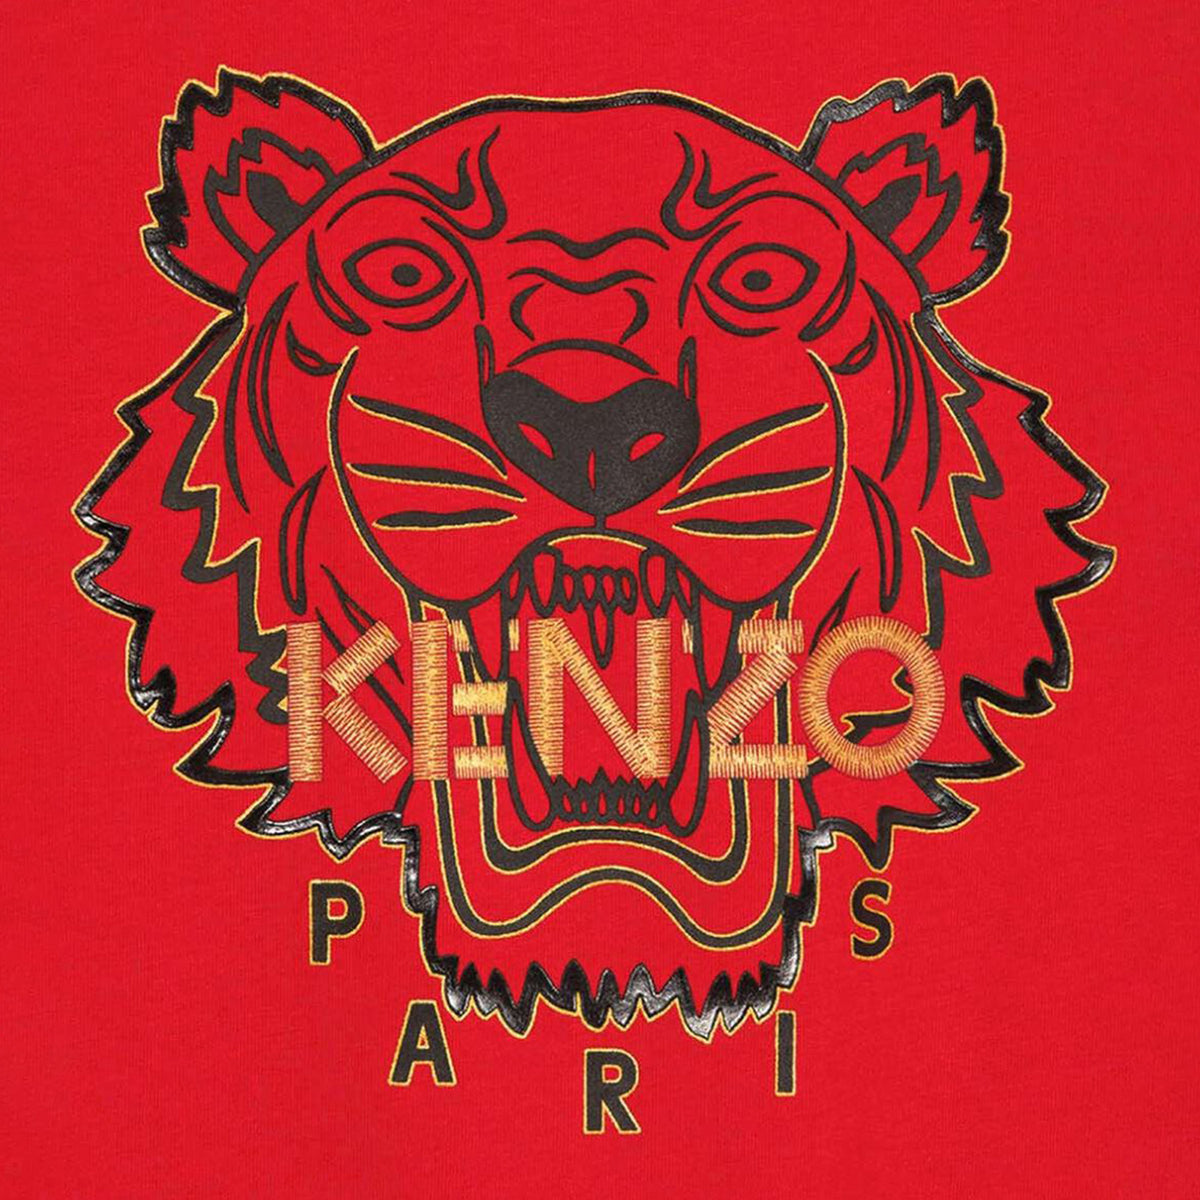 Kenzo Women's 'Year of The Tiger' Classic Fit T-Shirt